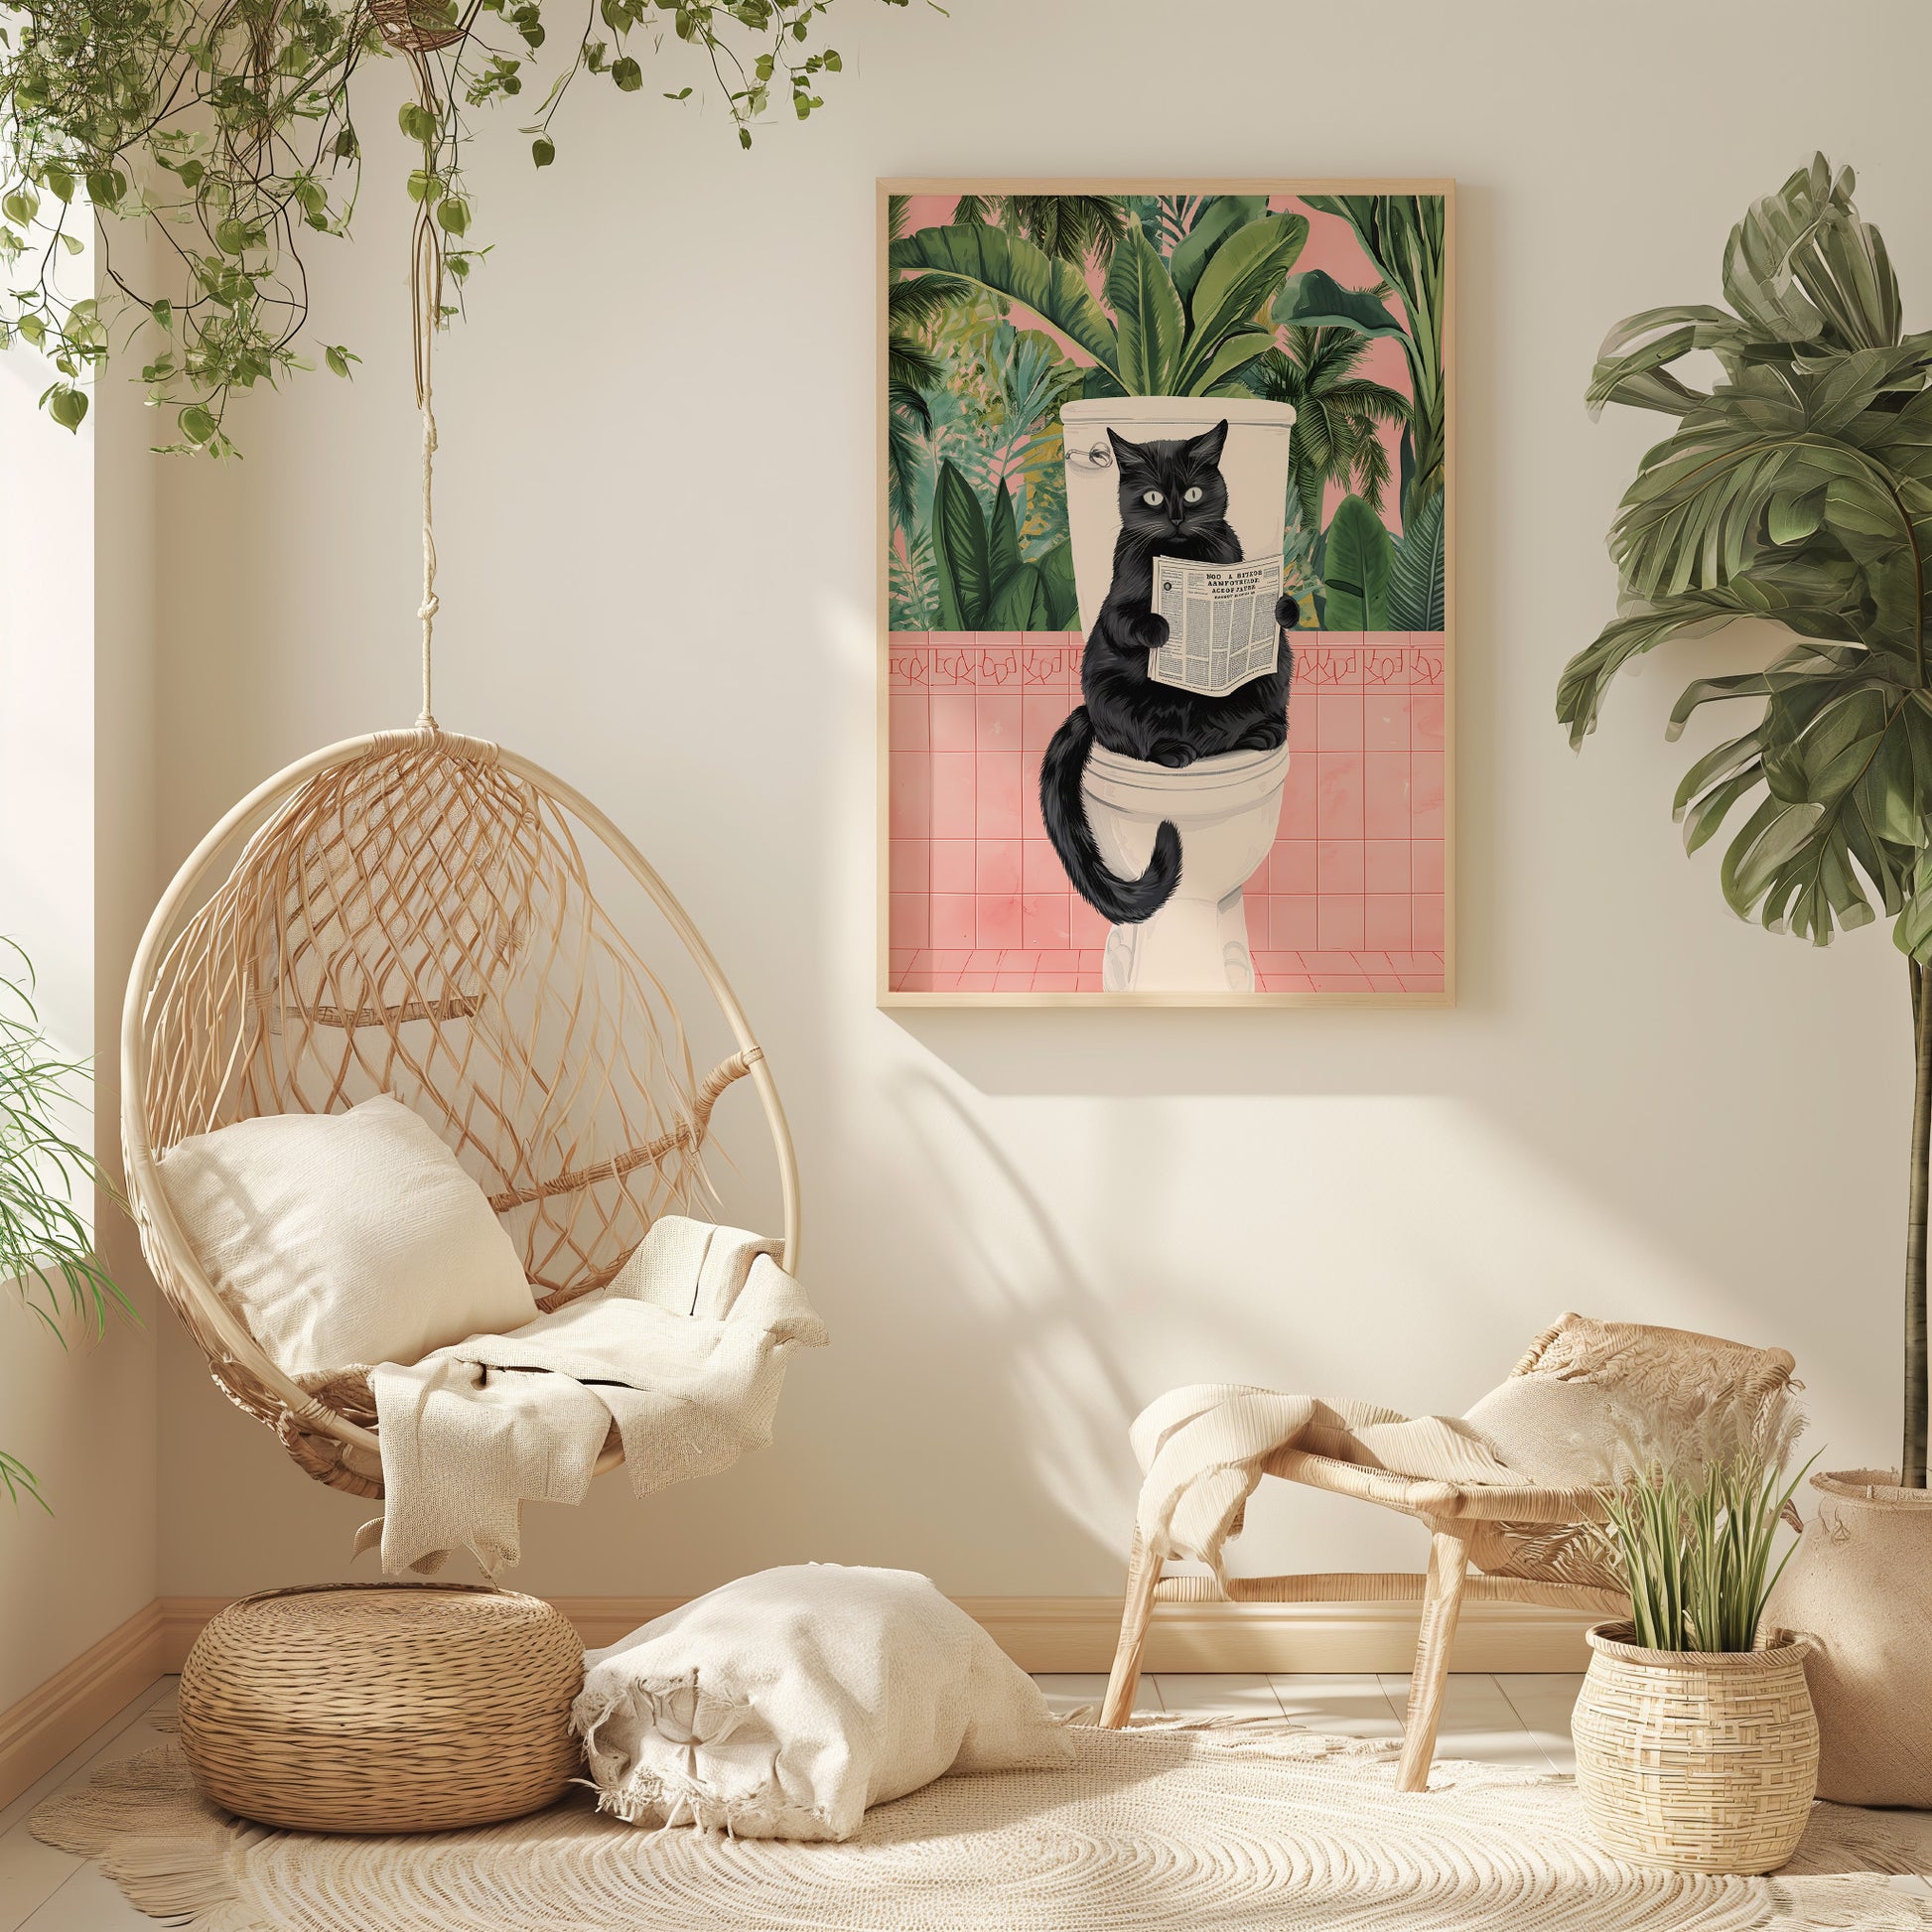 A cozy room with a hanging chair, potted plants, and a whimsical painting of a cat.